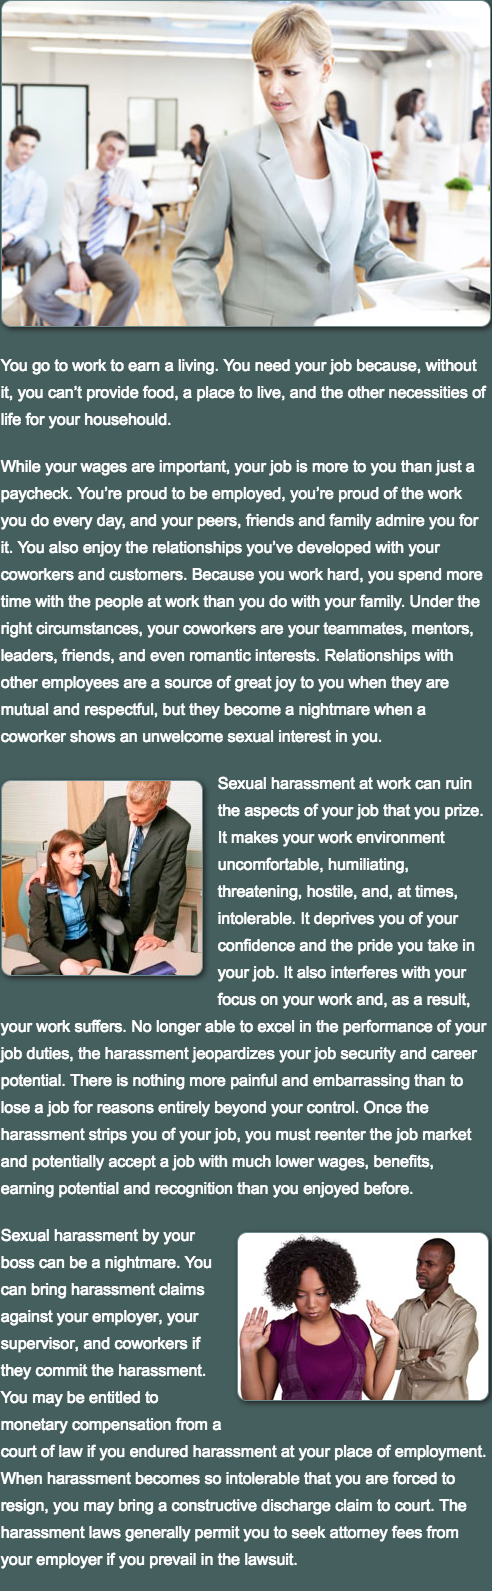 Sexual harassment at work can ruin the aspects of your job that you prize.